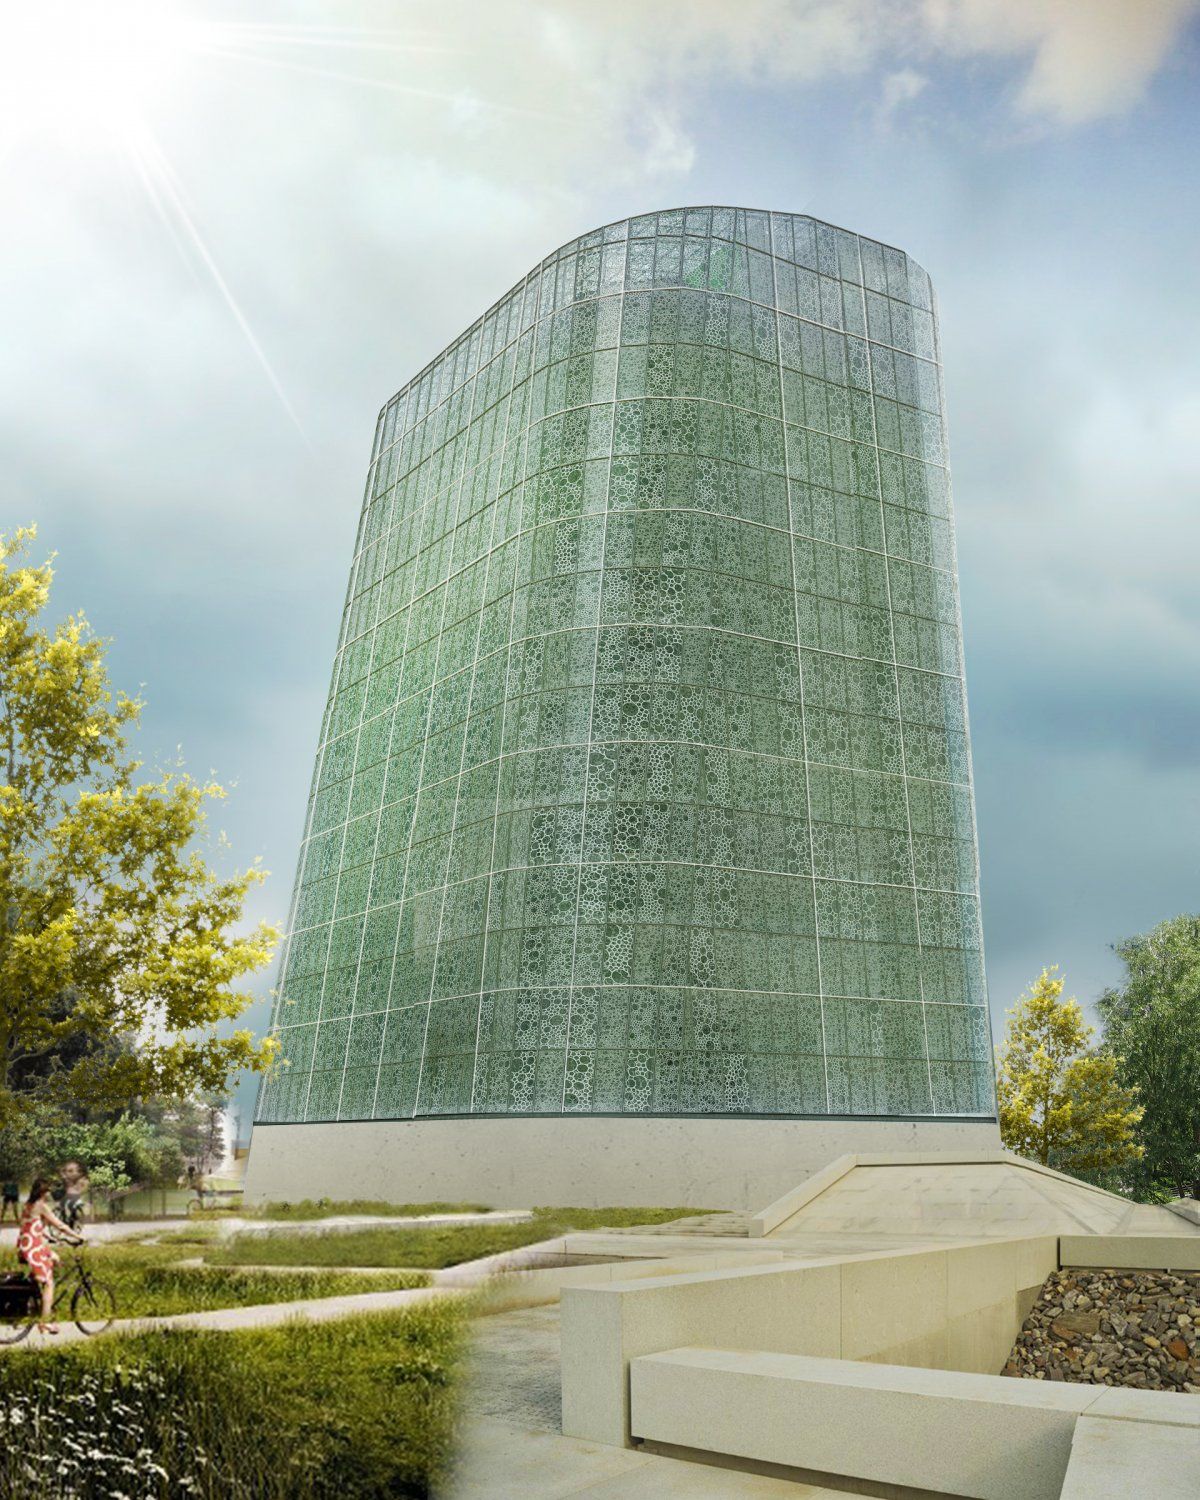 This building will produce approximately 550 tons of vegetables annually. (Image Credit: Plantagon)